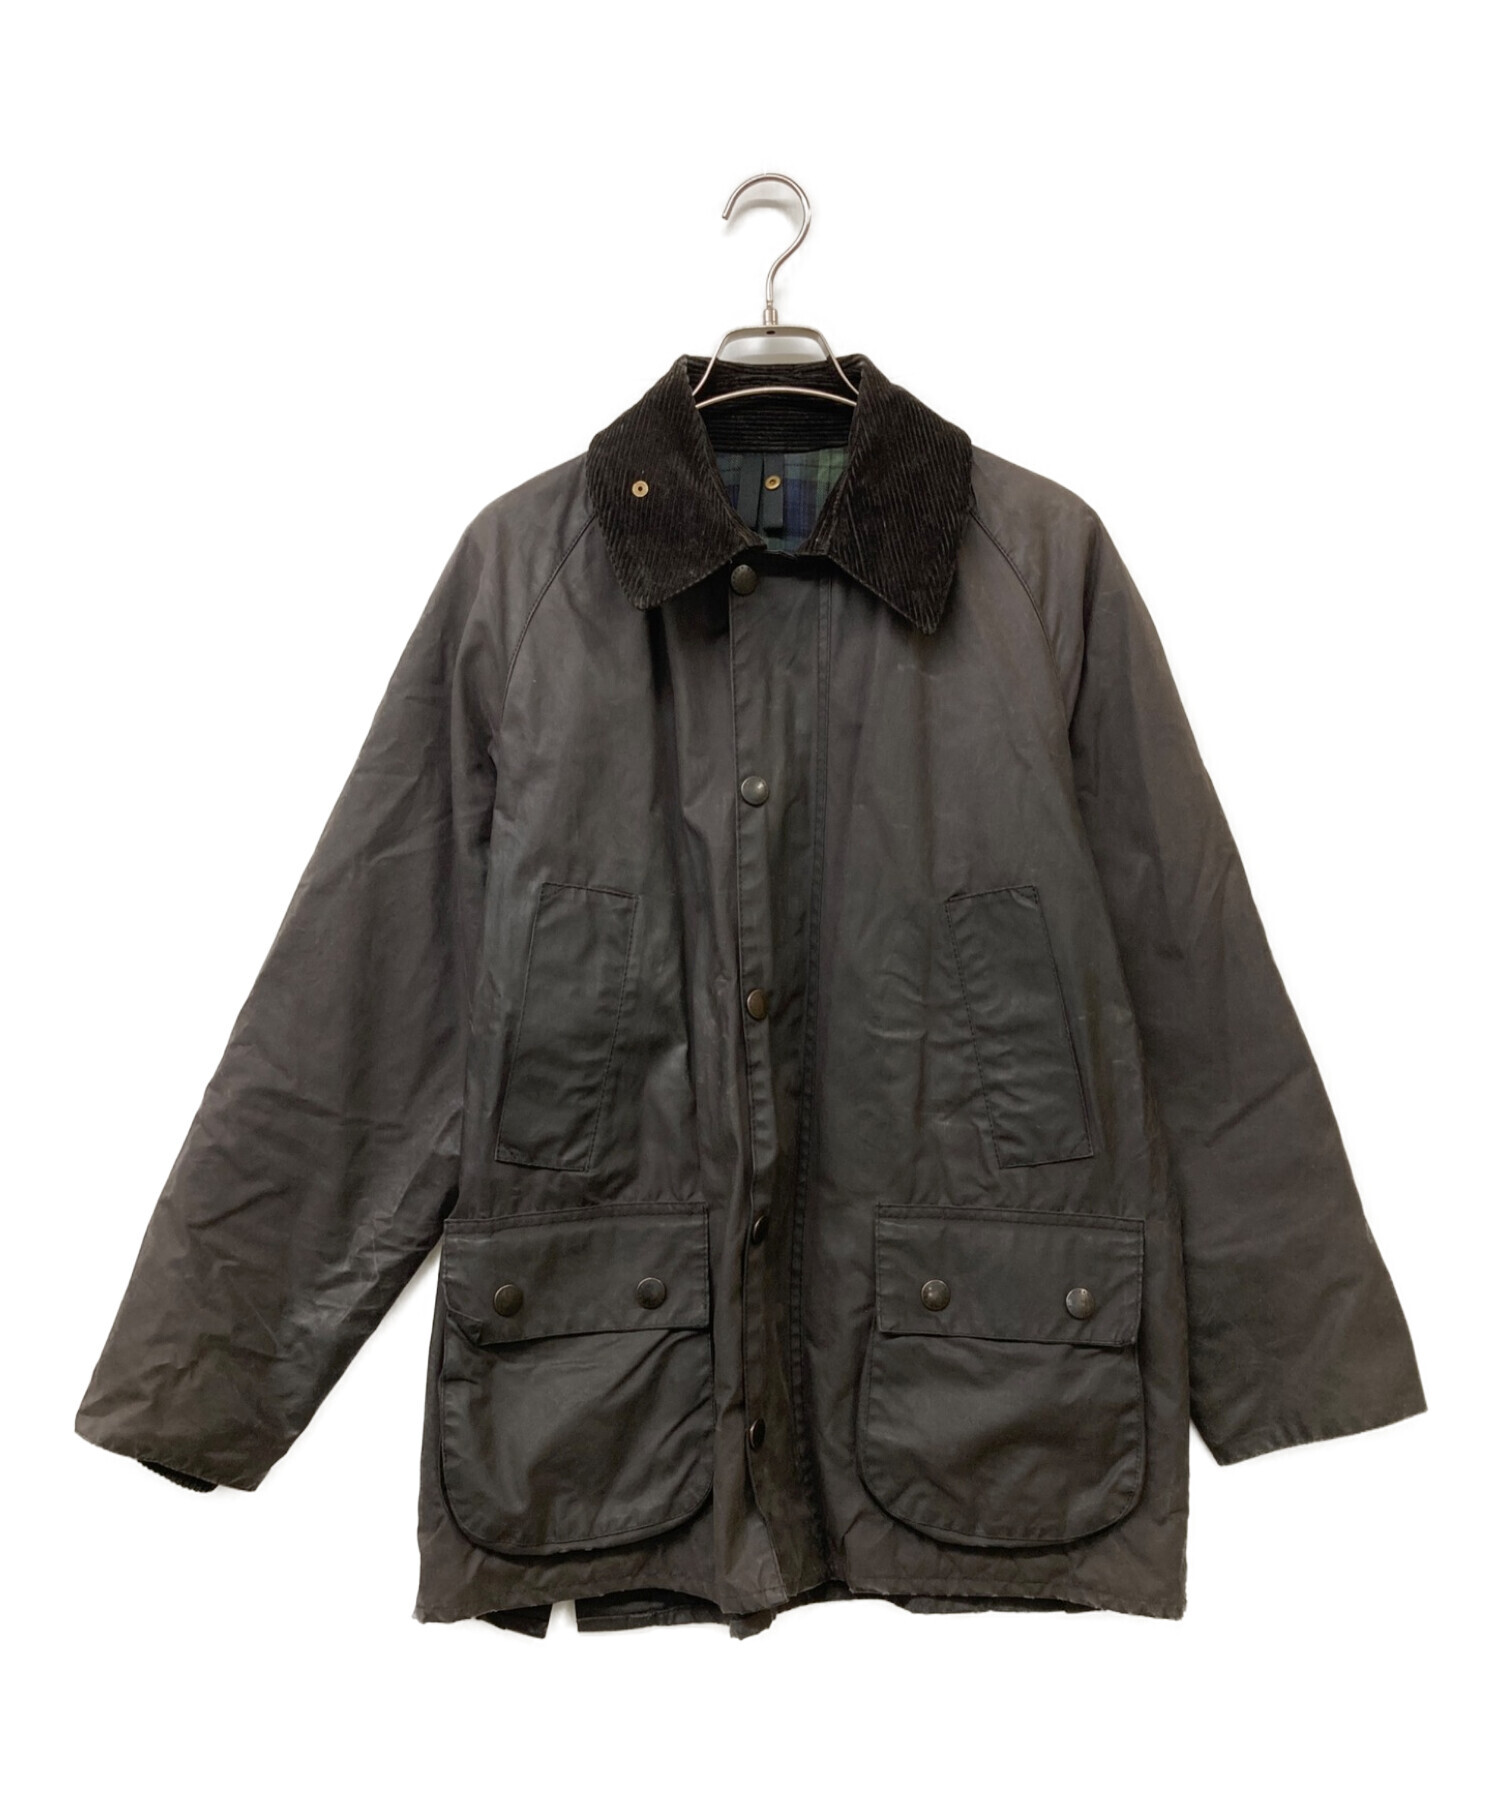 Barbour (バブアー) A104 BEDALE JACKET ブラウン サイズ:C36